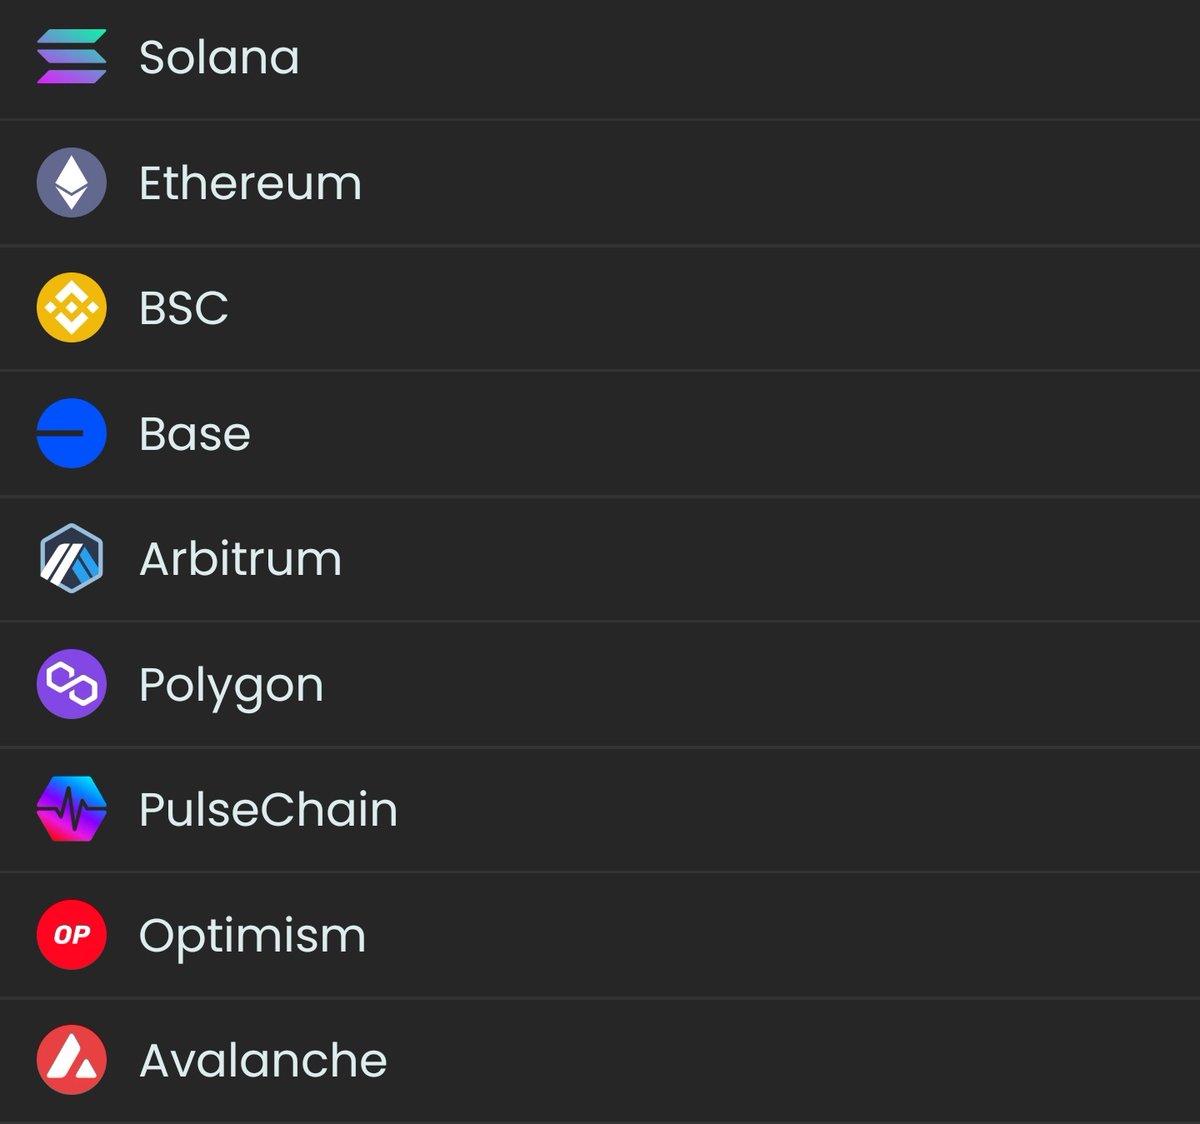 Focus on the positives... #PulseChain is in 7th position out of all the chains on DEXSCREENER! Also another weak hand whale twat has left the building! LFG! 🔥🚀